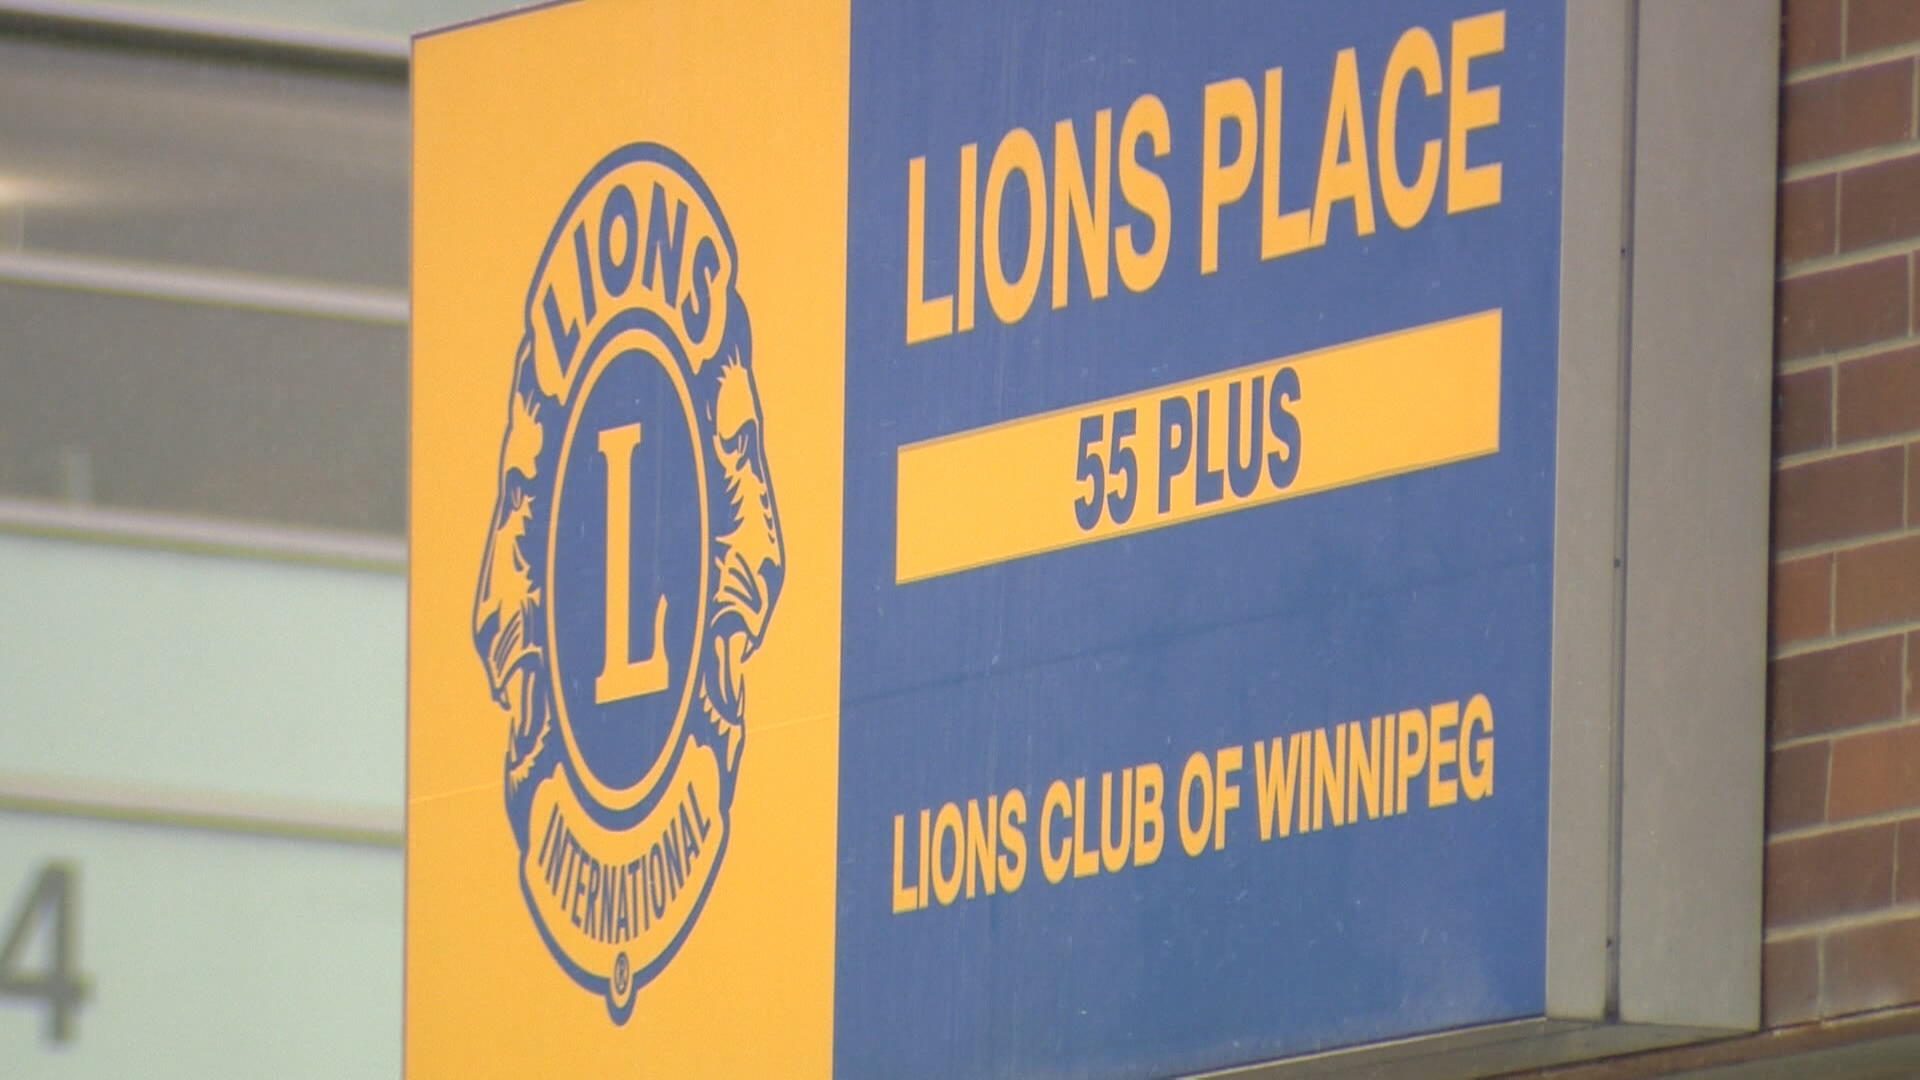 Sale of Lions Place housing complex considered elder abuse, says CCPA report